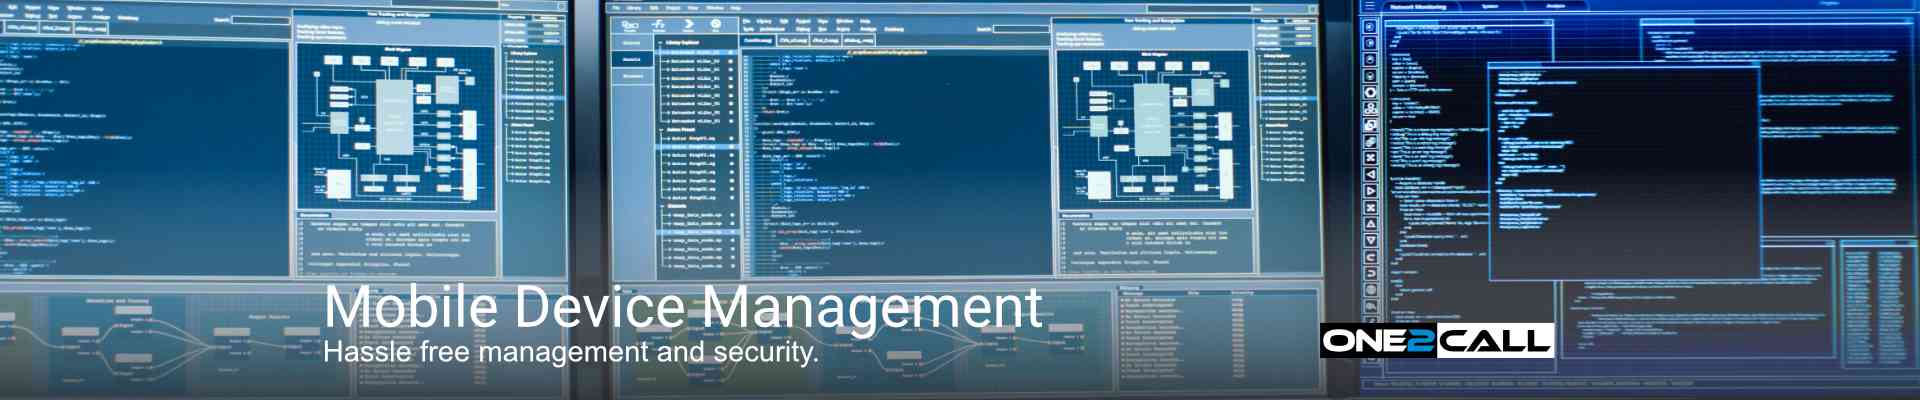 Mobile Device Management - Hassle free management and security.